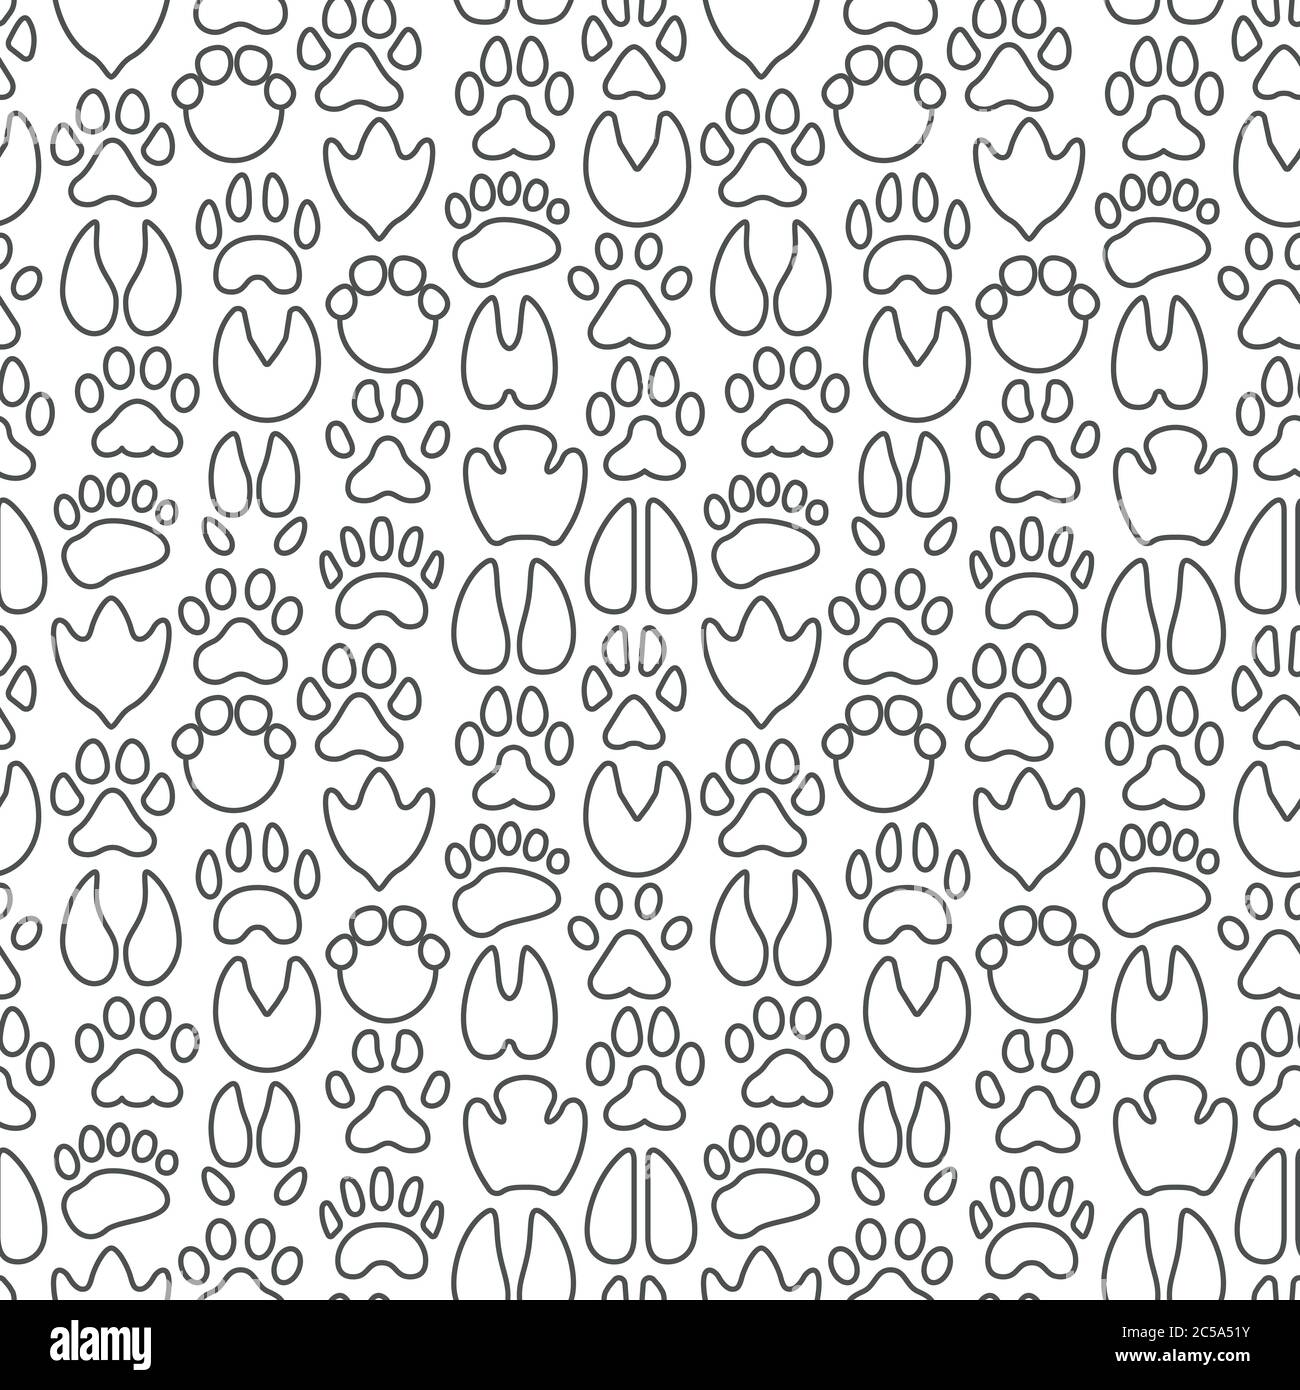 Animal paws seamless pattern with thin line icons Stock Vector